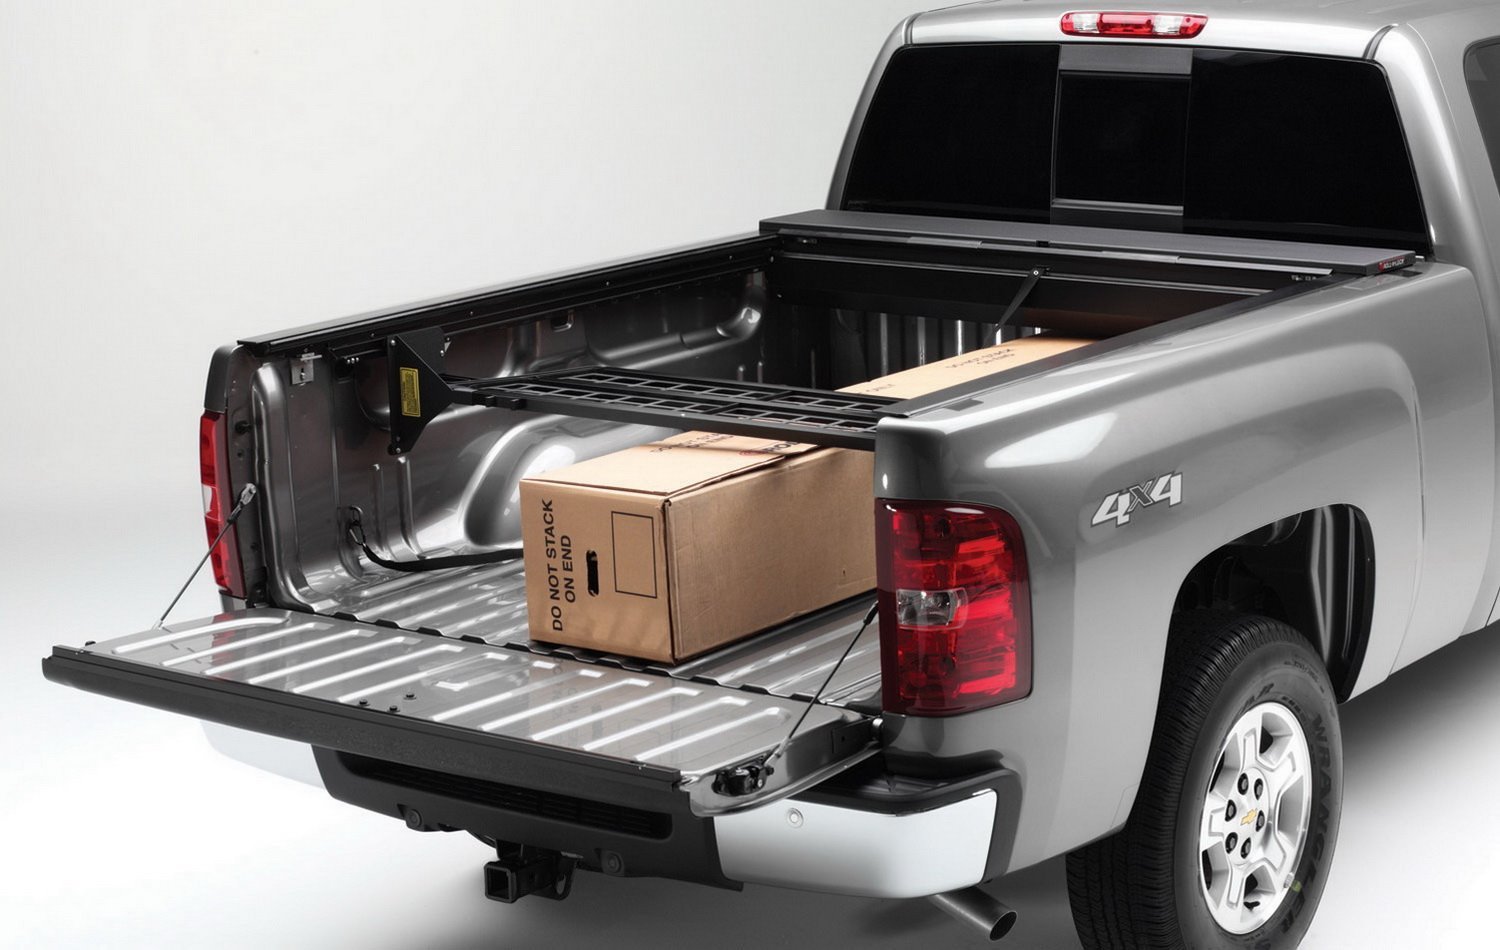 CM447 Cargo Manager Rolling Truck Bed Divider for 2019 Ram 1500 Classic, 2009-2018 Dodge Ram 1500 [5.6 ft. Bed]